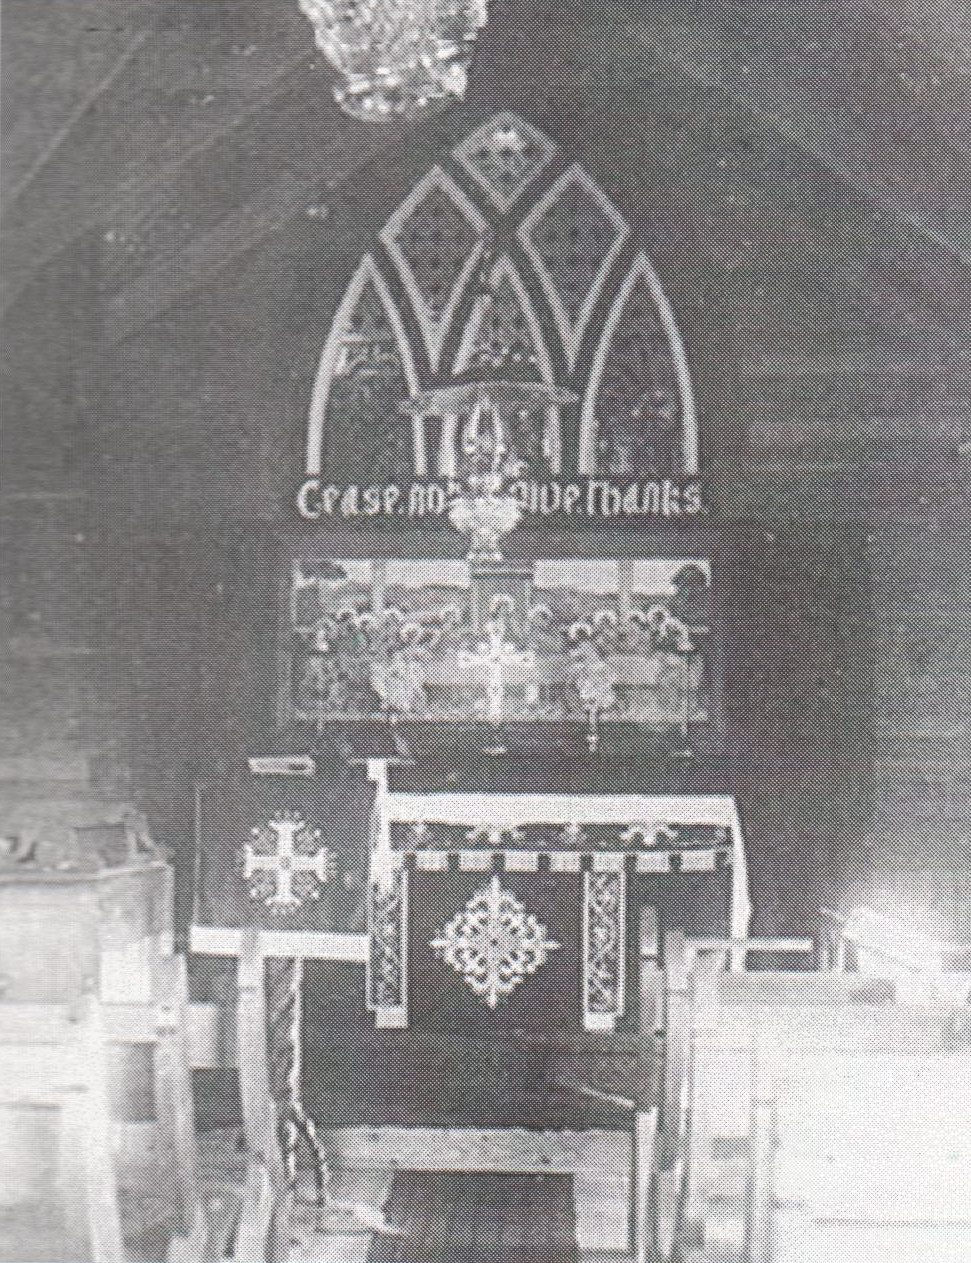 The original altar and hangings, with the "Cease Not To Give Thanks" motto above